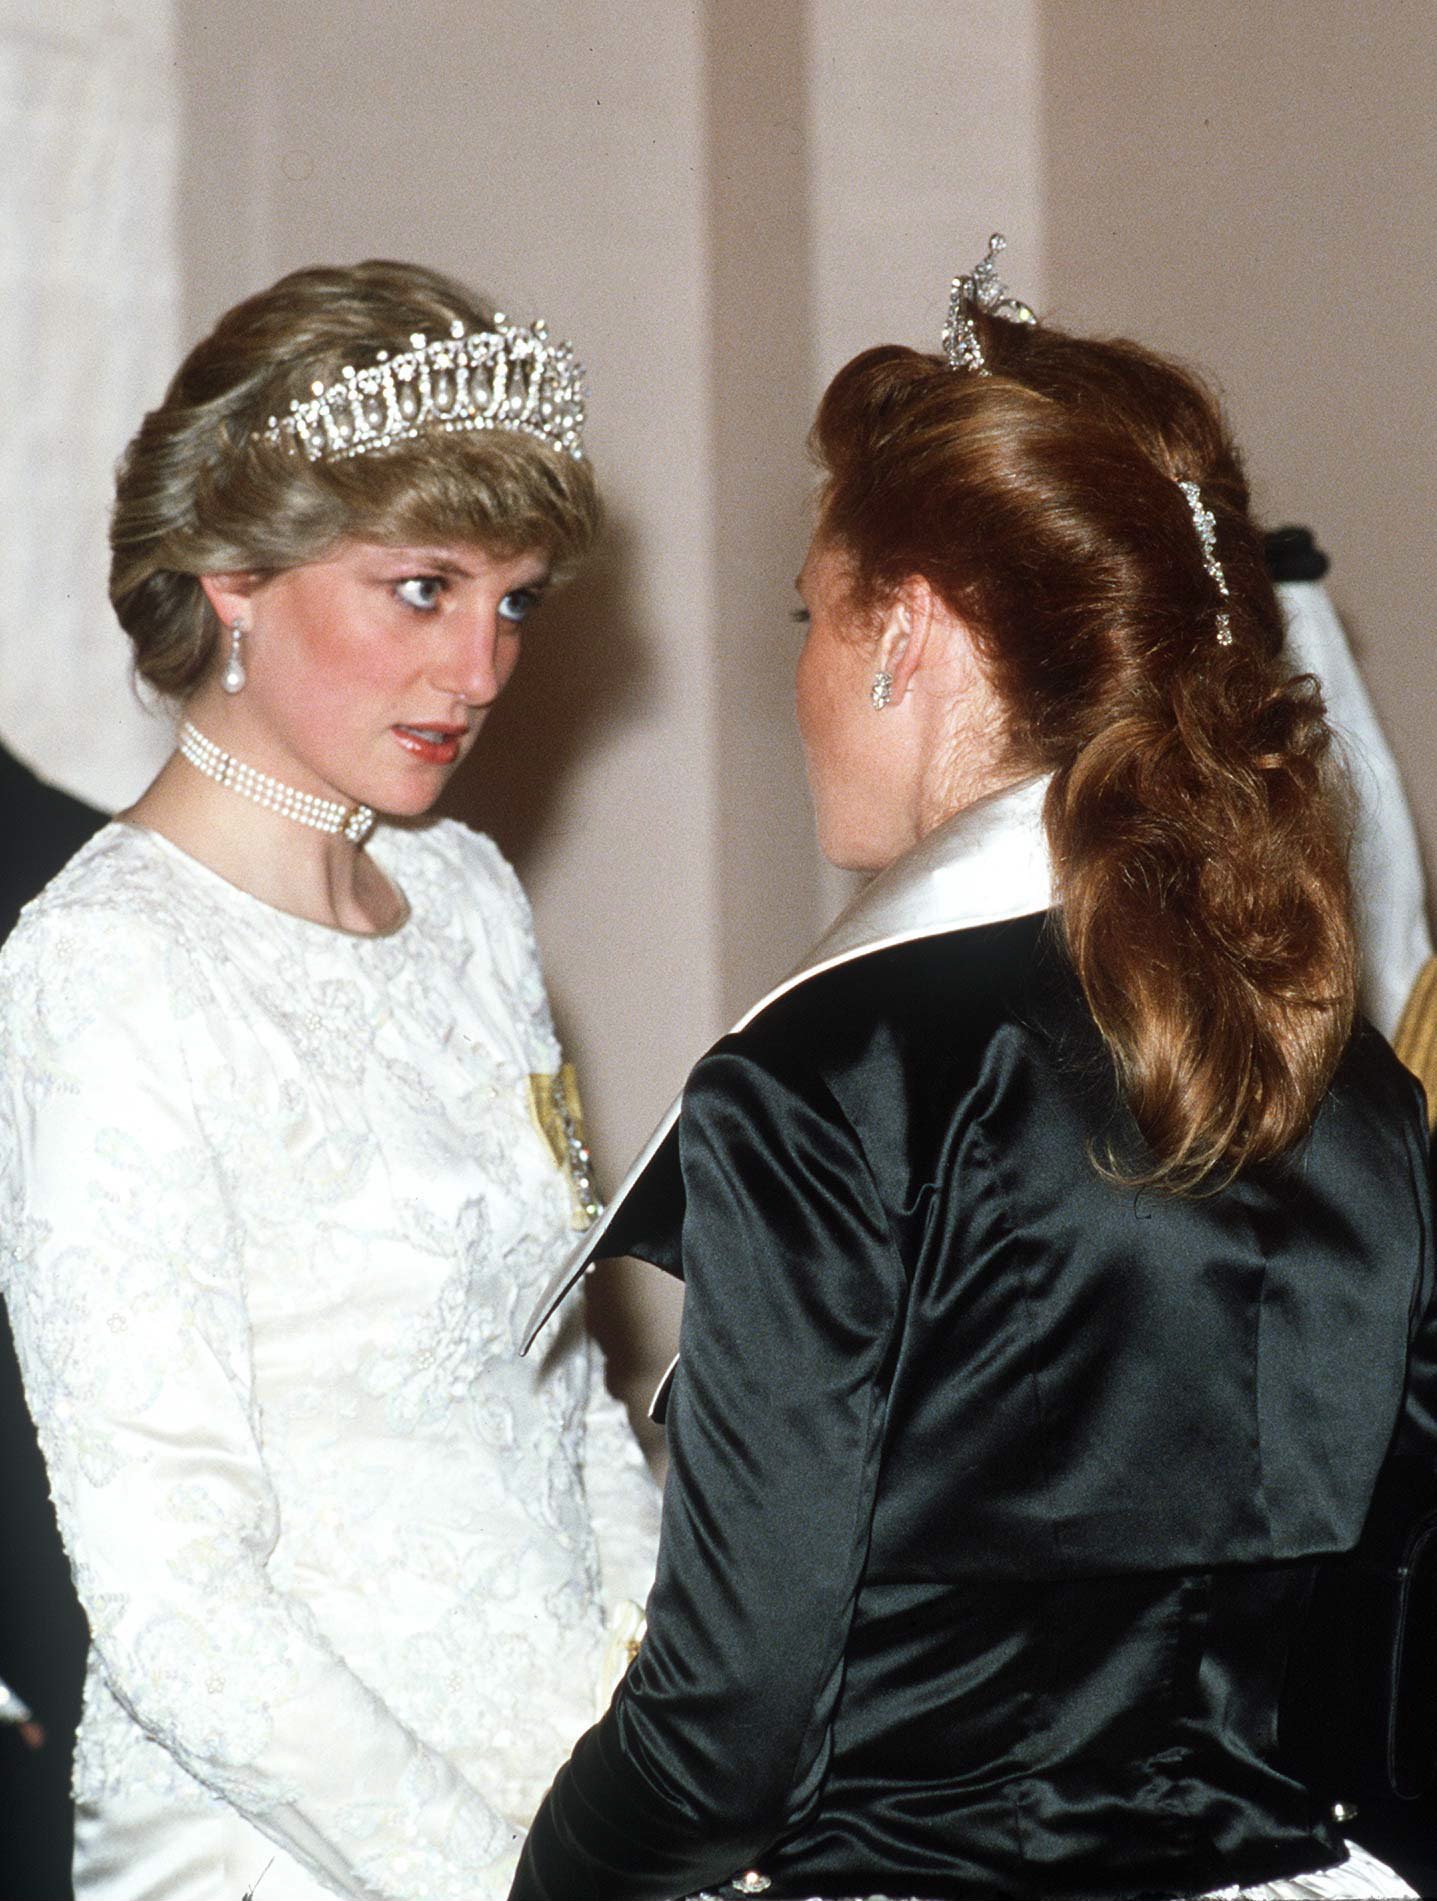 Princess Diana with Sarah, Duchess of York at a Banquet at Claridges Hotel in London. / Source: Getty Images